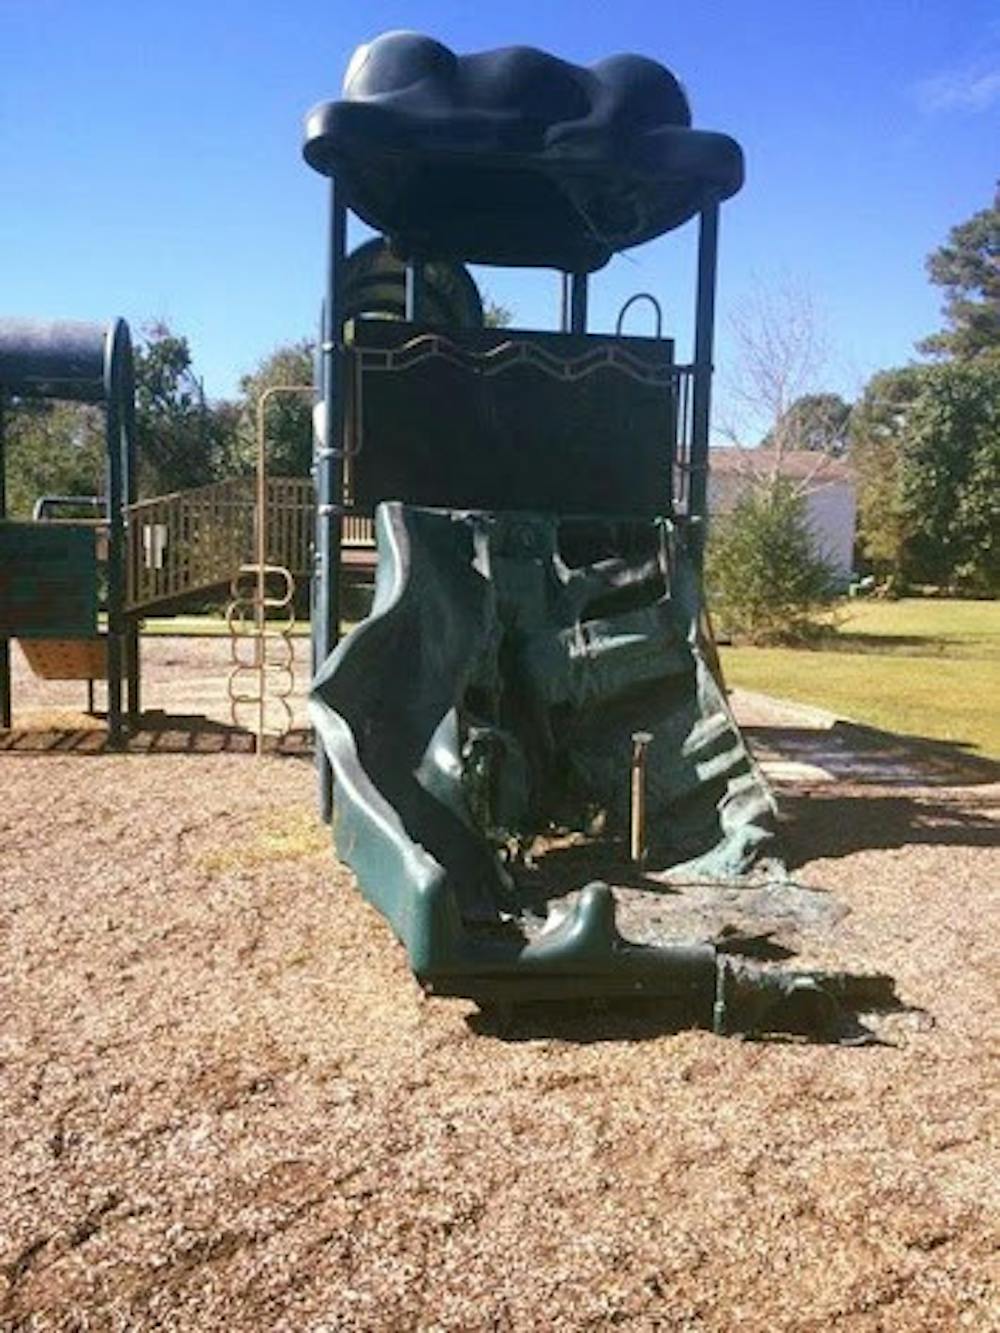 The Village Green playground was burned by a gang two years ago, neighbors said.